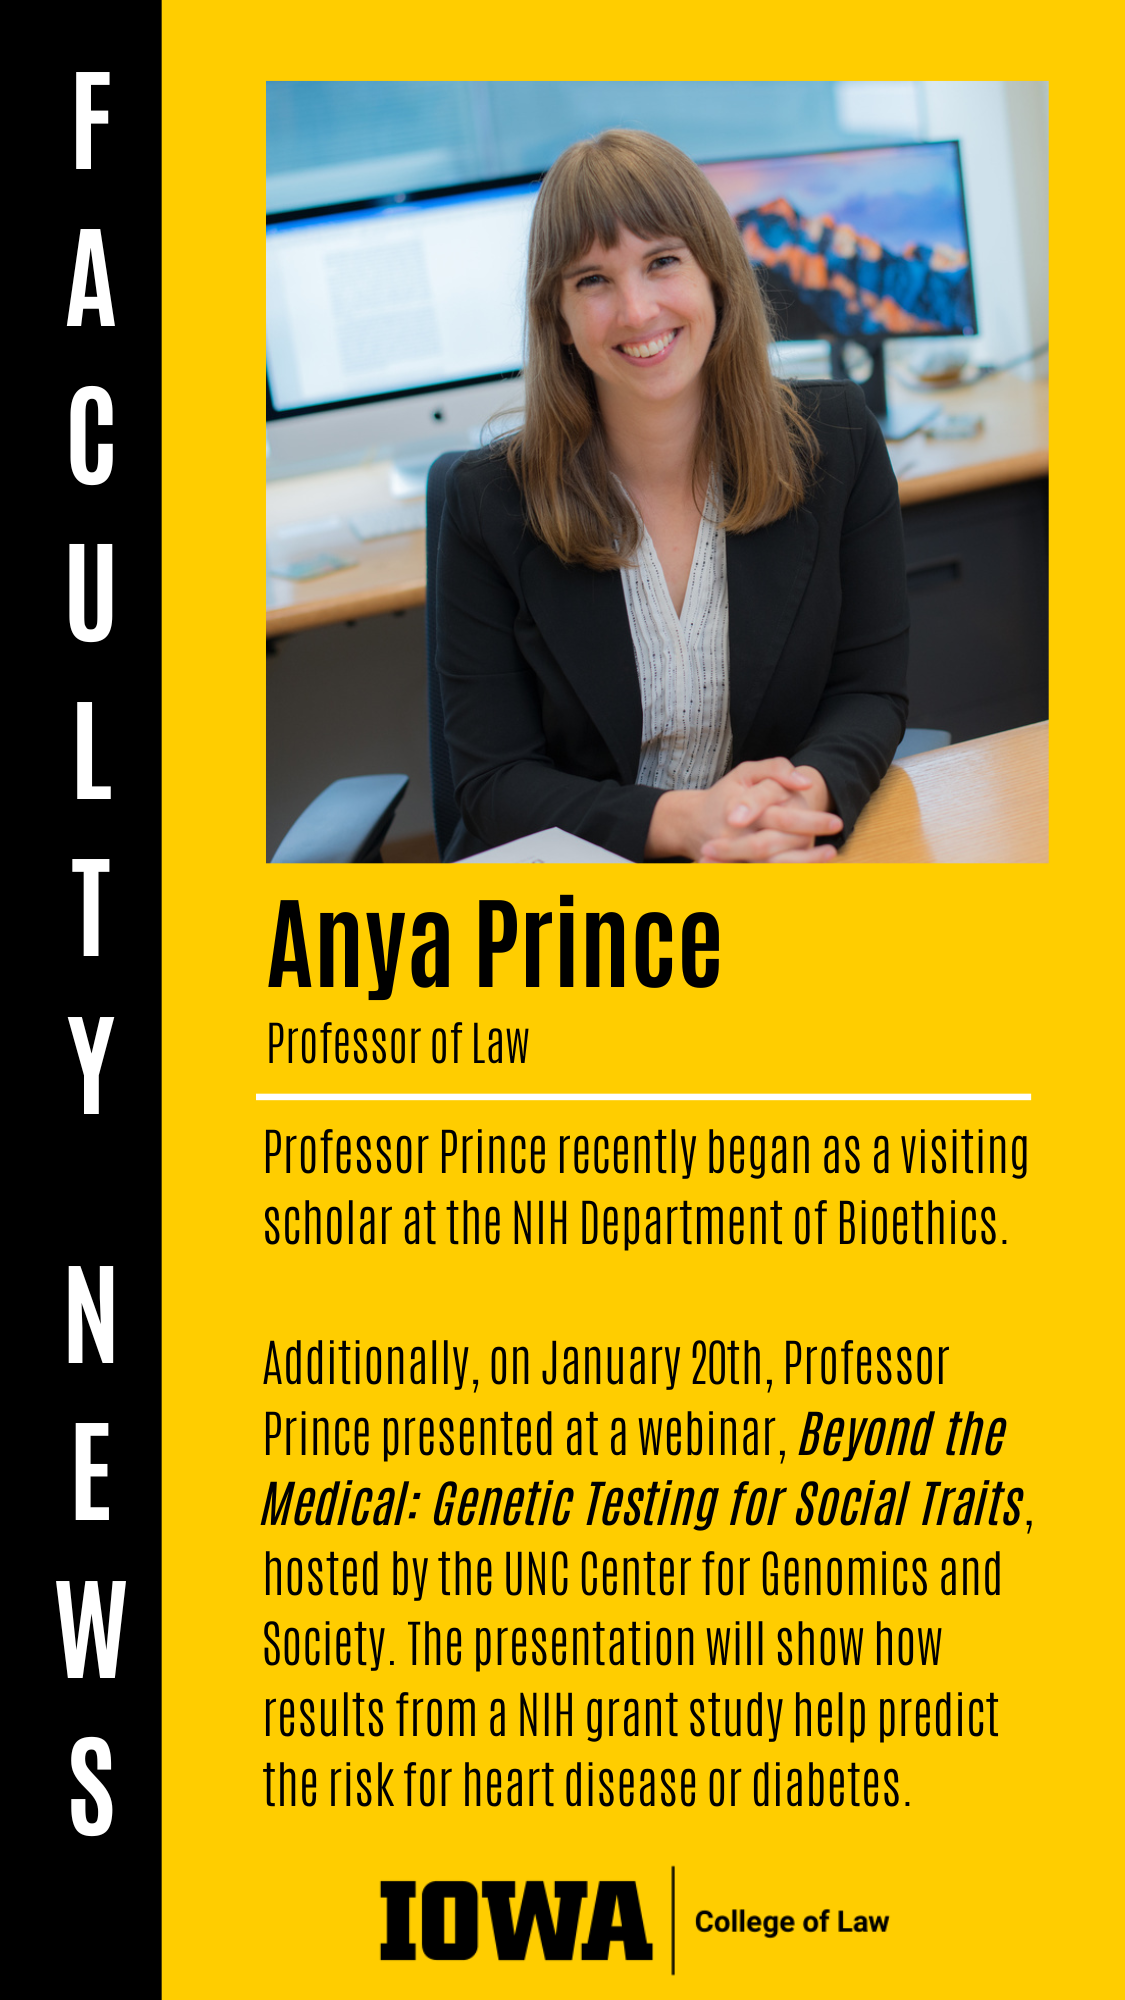 Faculty News - Anya Prince (Professor of Law): Professor Prince recently began as a visiting scholar at the NIH Department of Bioethics.   Additionally, on January 20th, Professor Prince presented at a webinar, Beyond the Medical: Genetic Testing for Social Traits, hosted by the UNC Center for Genomics and Society. The presentation will show how results from a NIH grant study help predict the risk for heart disease or diabetes.